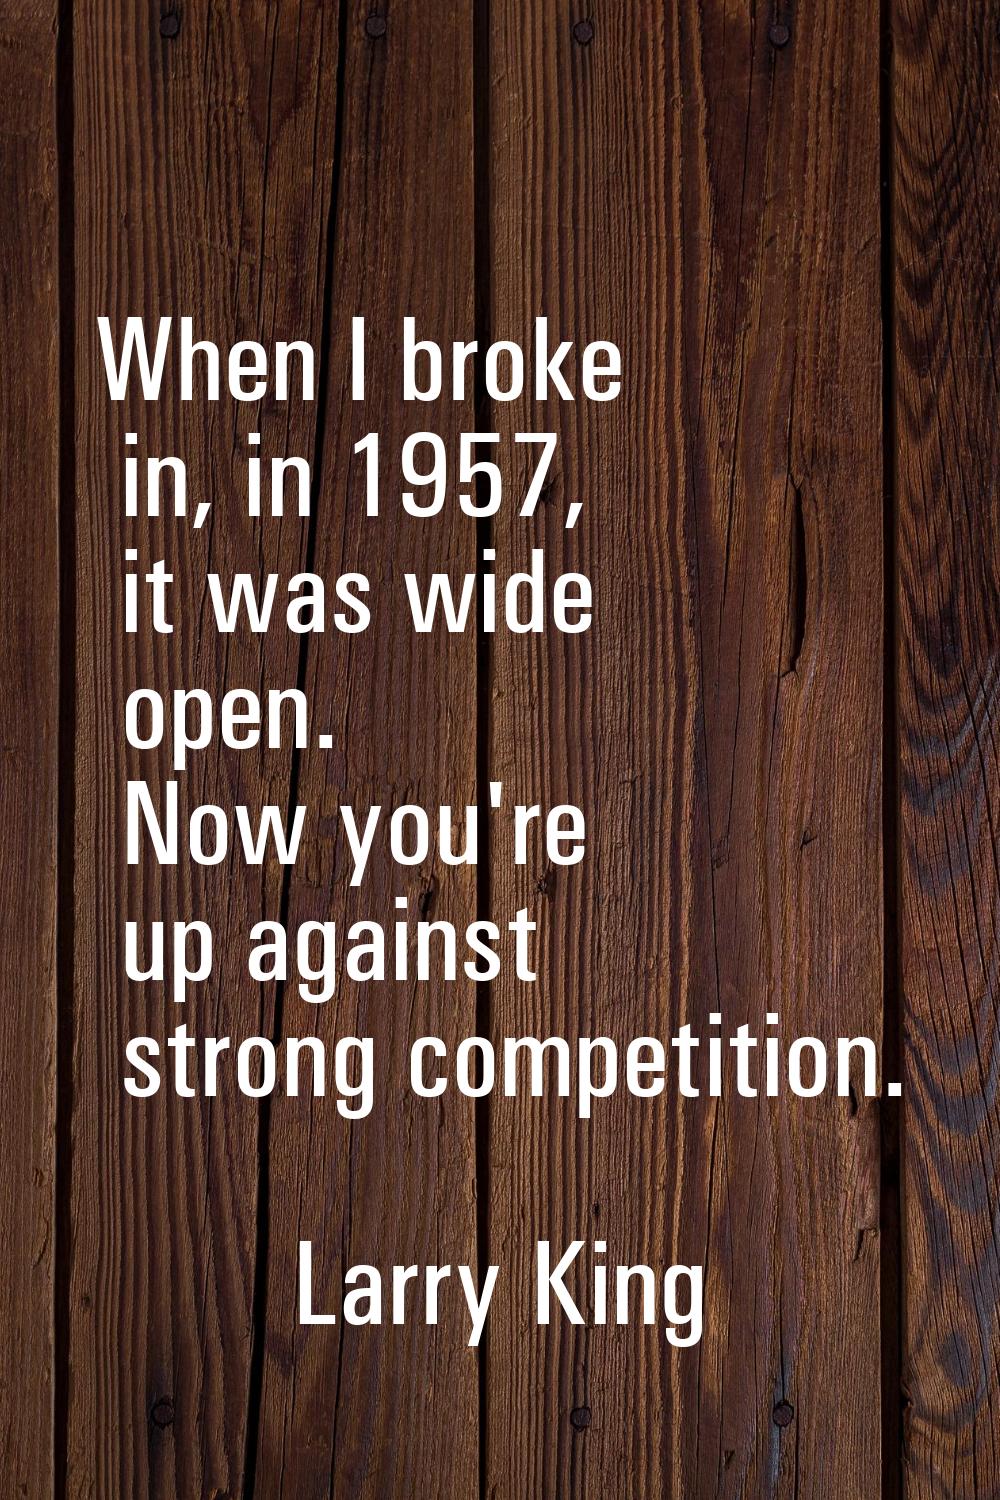 When I broke in, in 1957, it was wide open. Now you're up against strong competition.